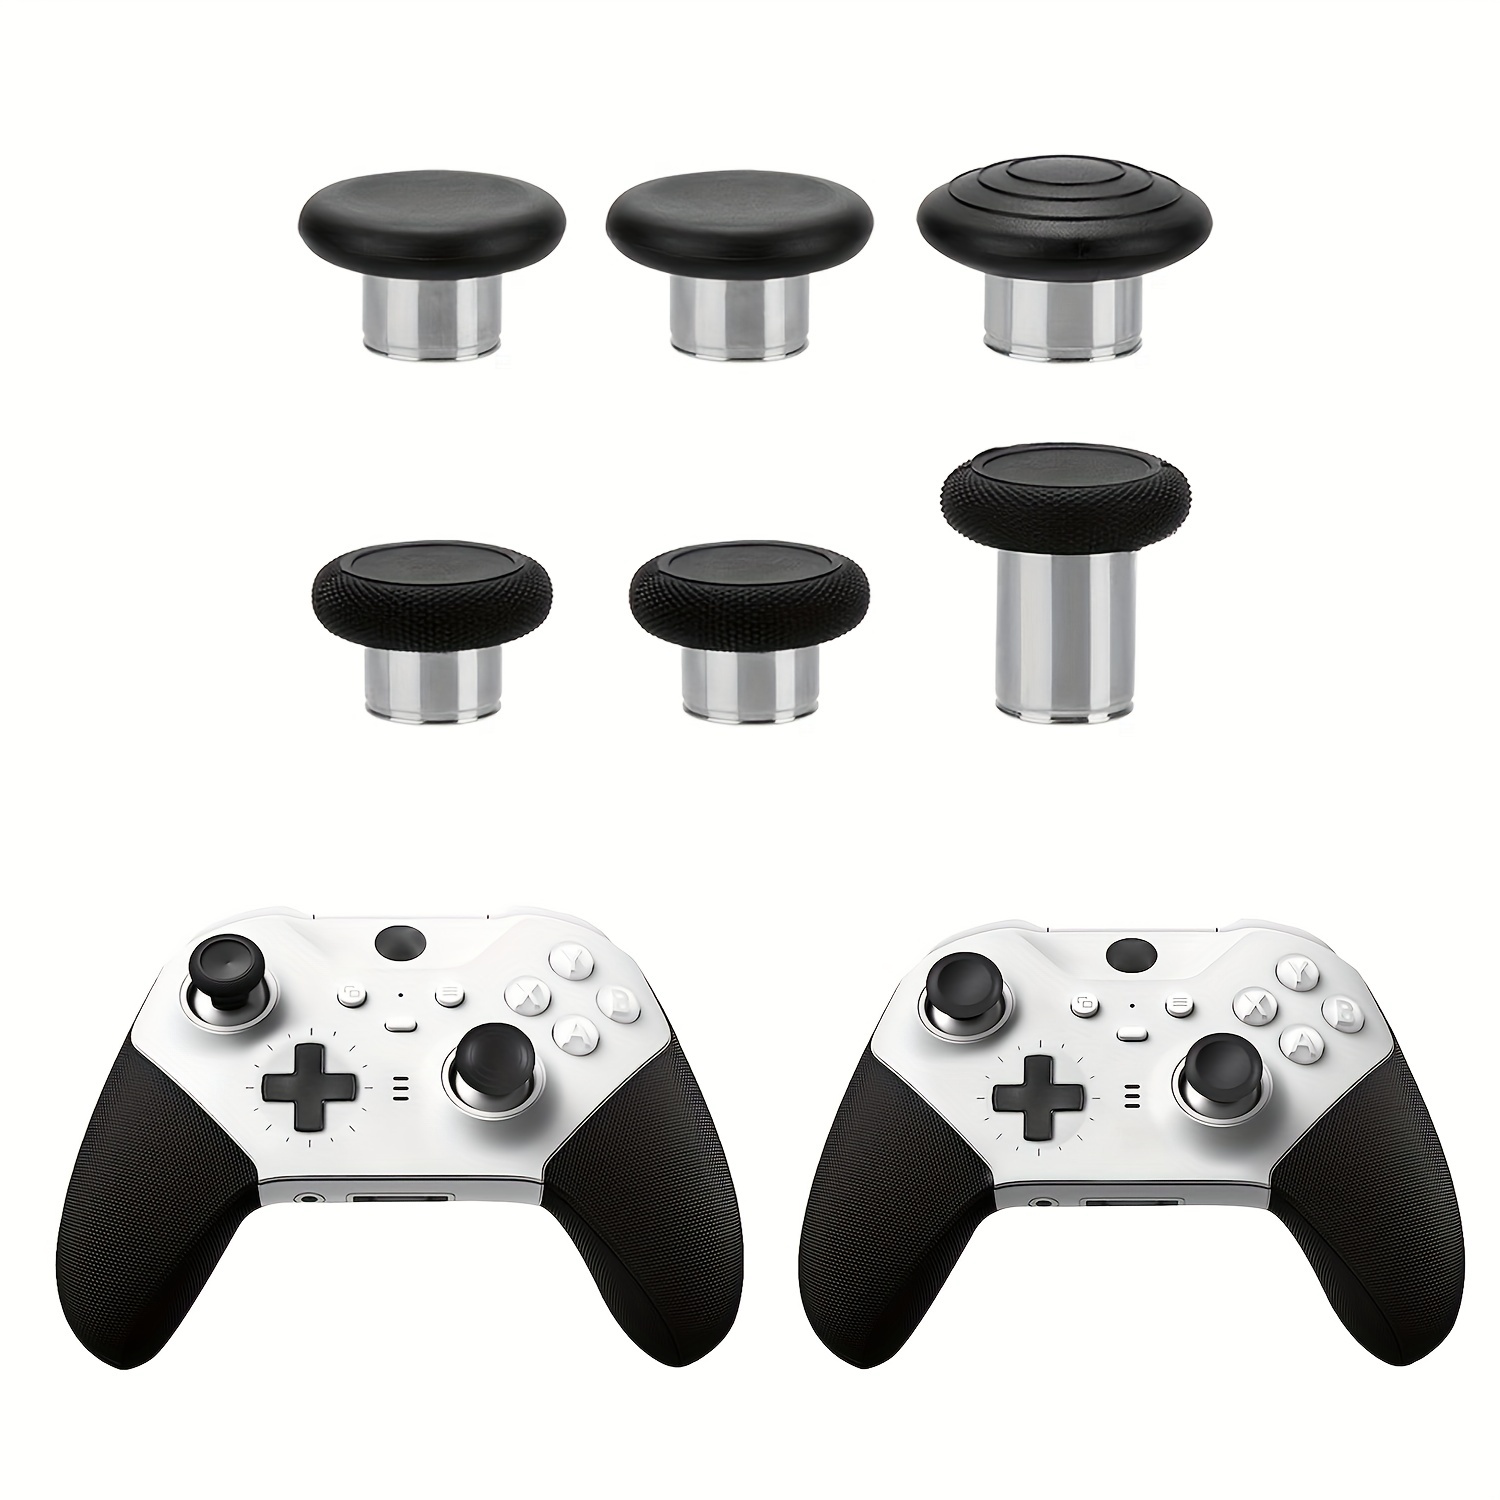 Thumbsticks for PS4 controllers OEM - 2 pack Black